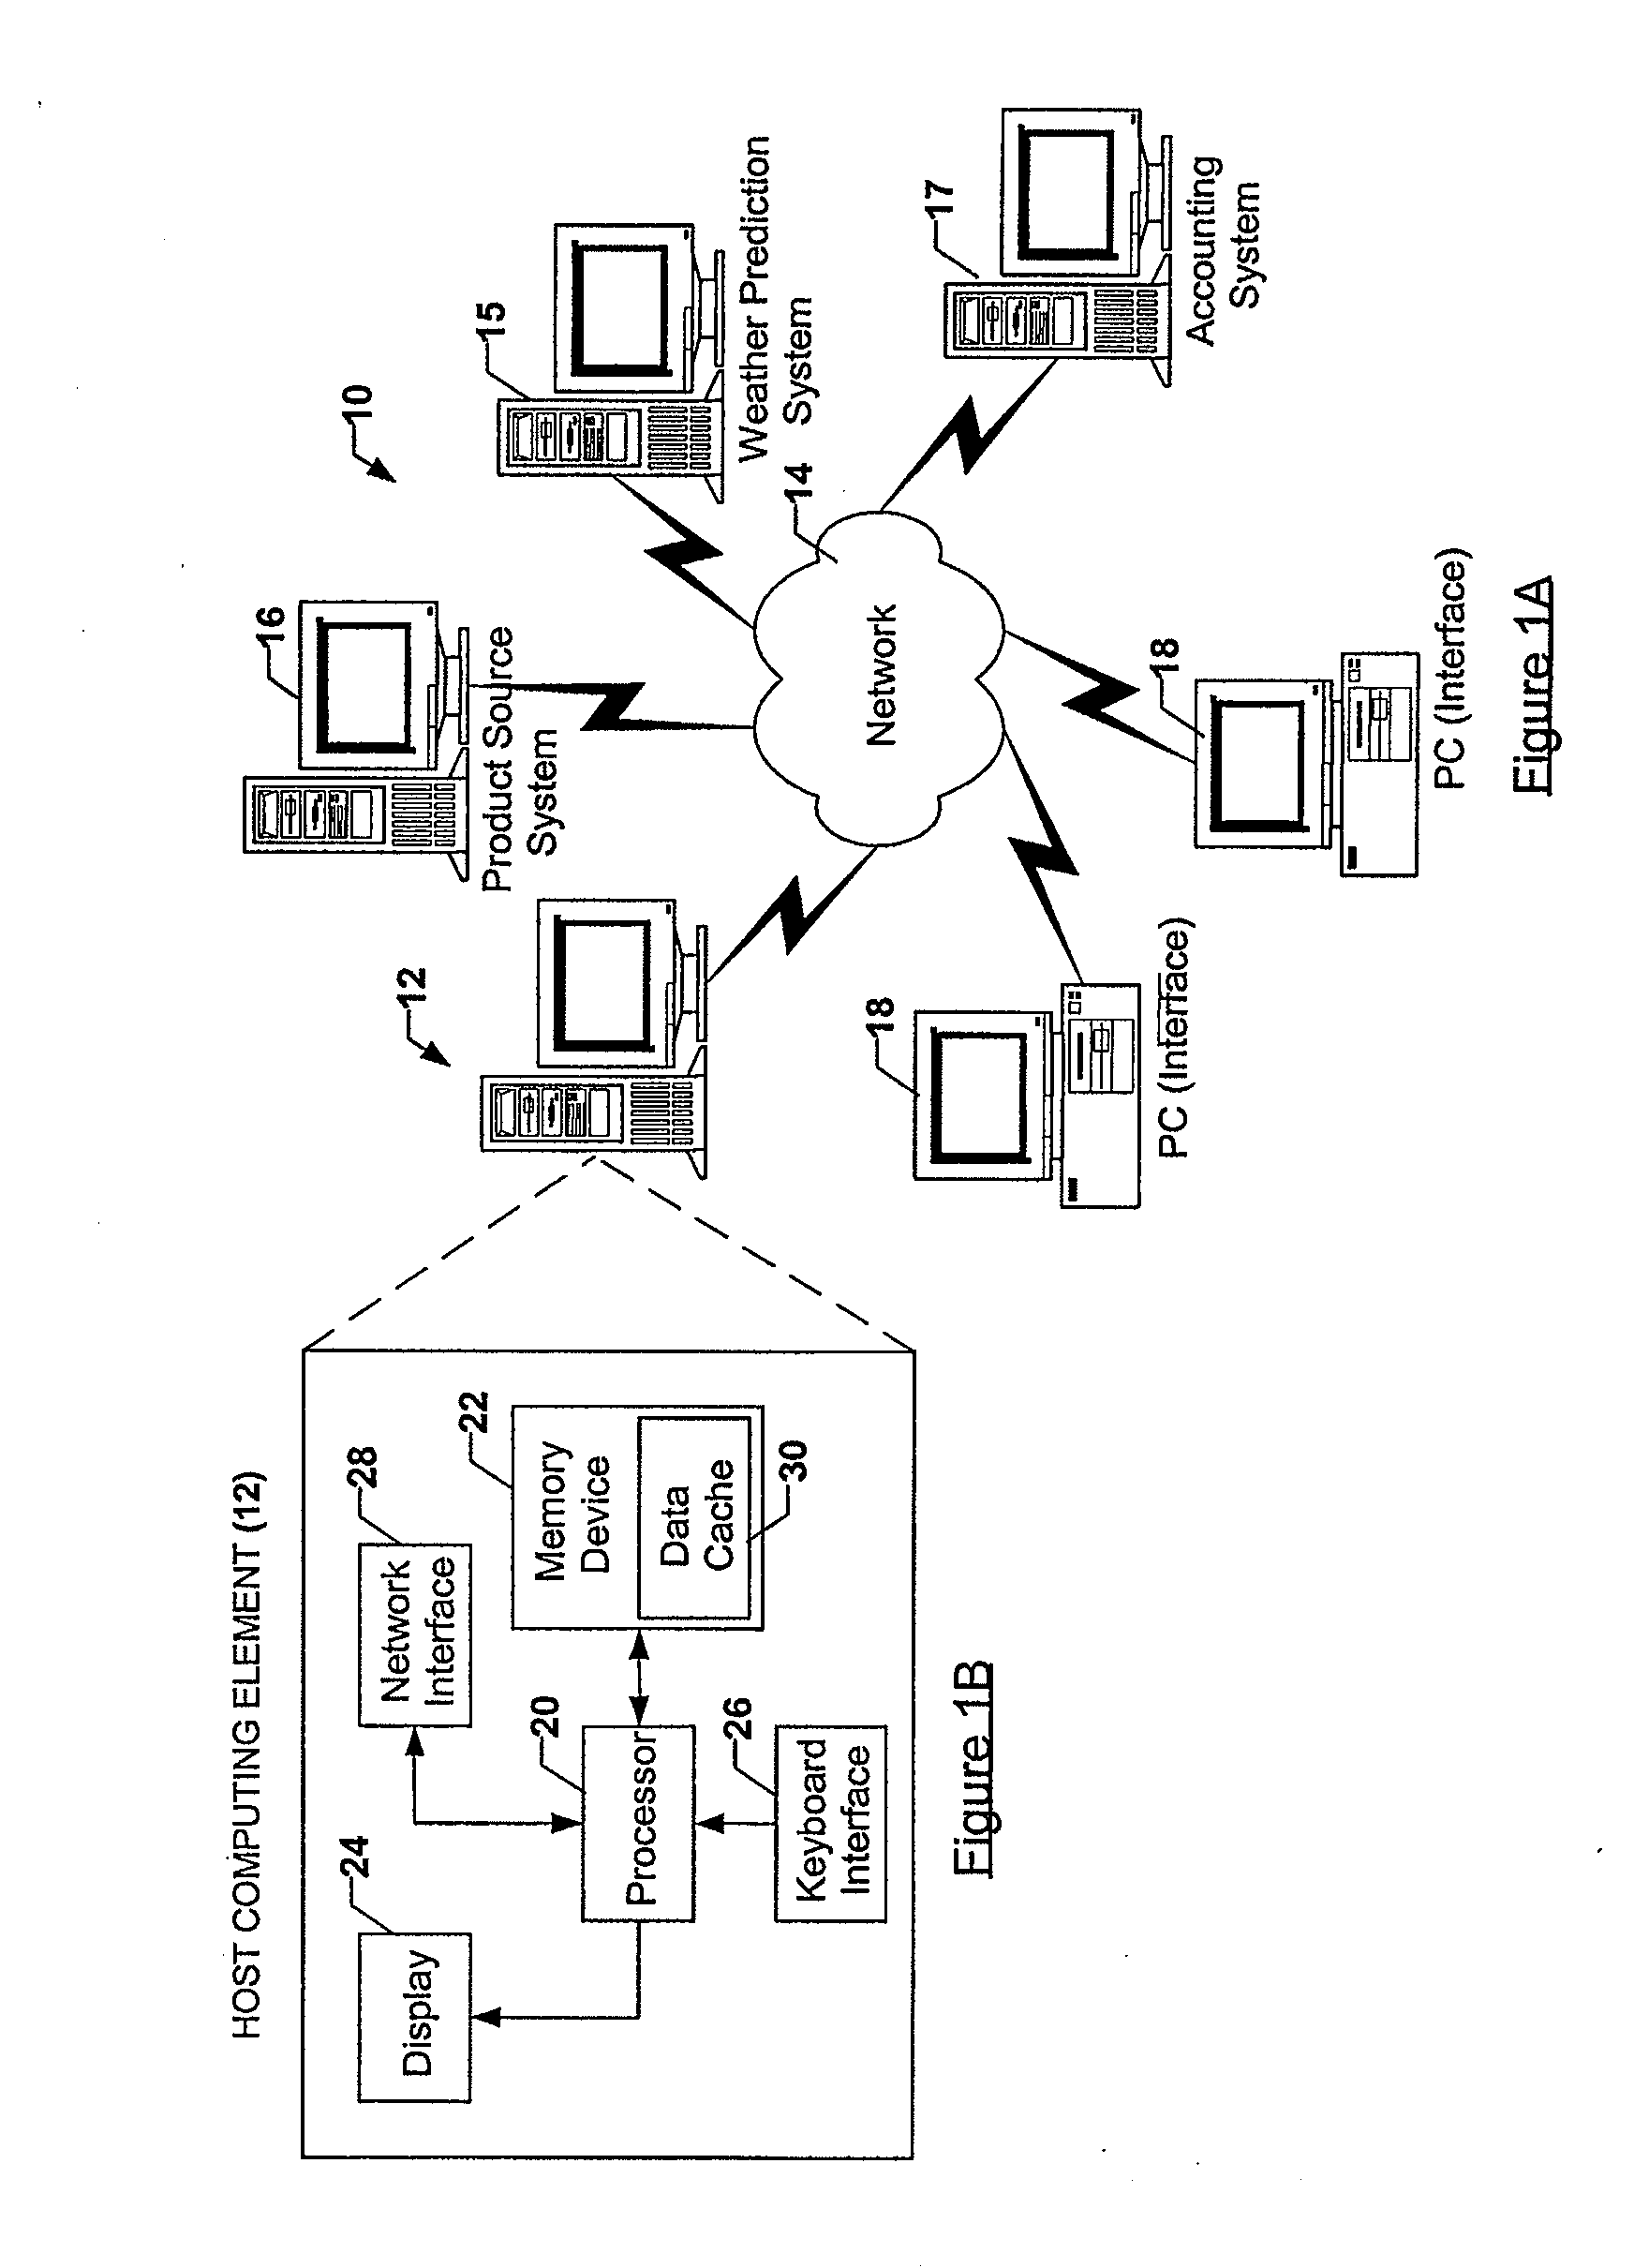 Systems, Methods, and Computer Program Products for Retrieving Predicted Weather Conditions Corresponding to Selected Travel Itineraries Stored in an Inventory System